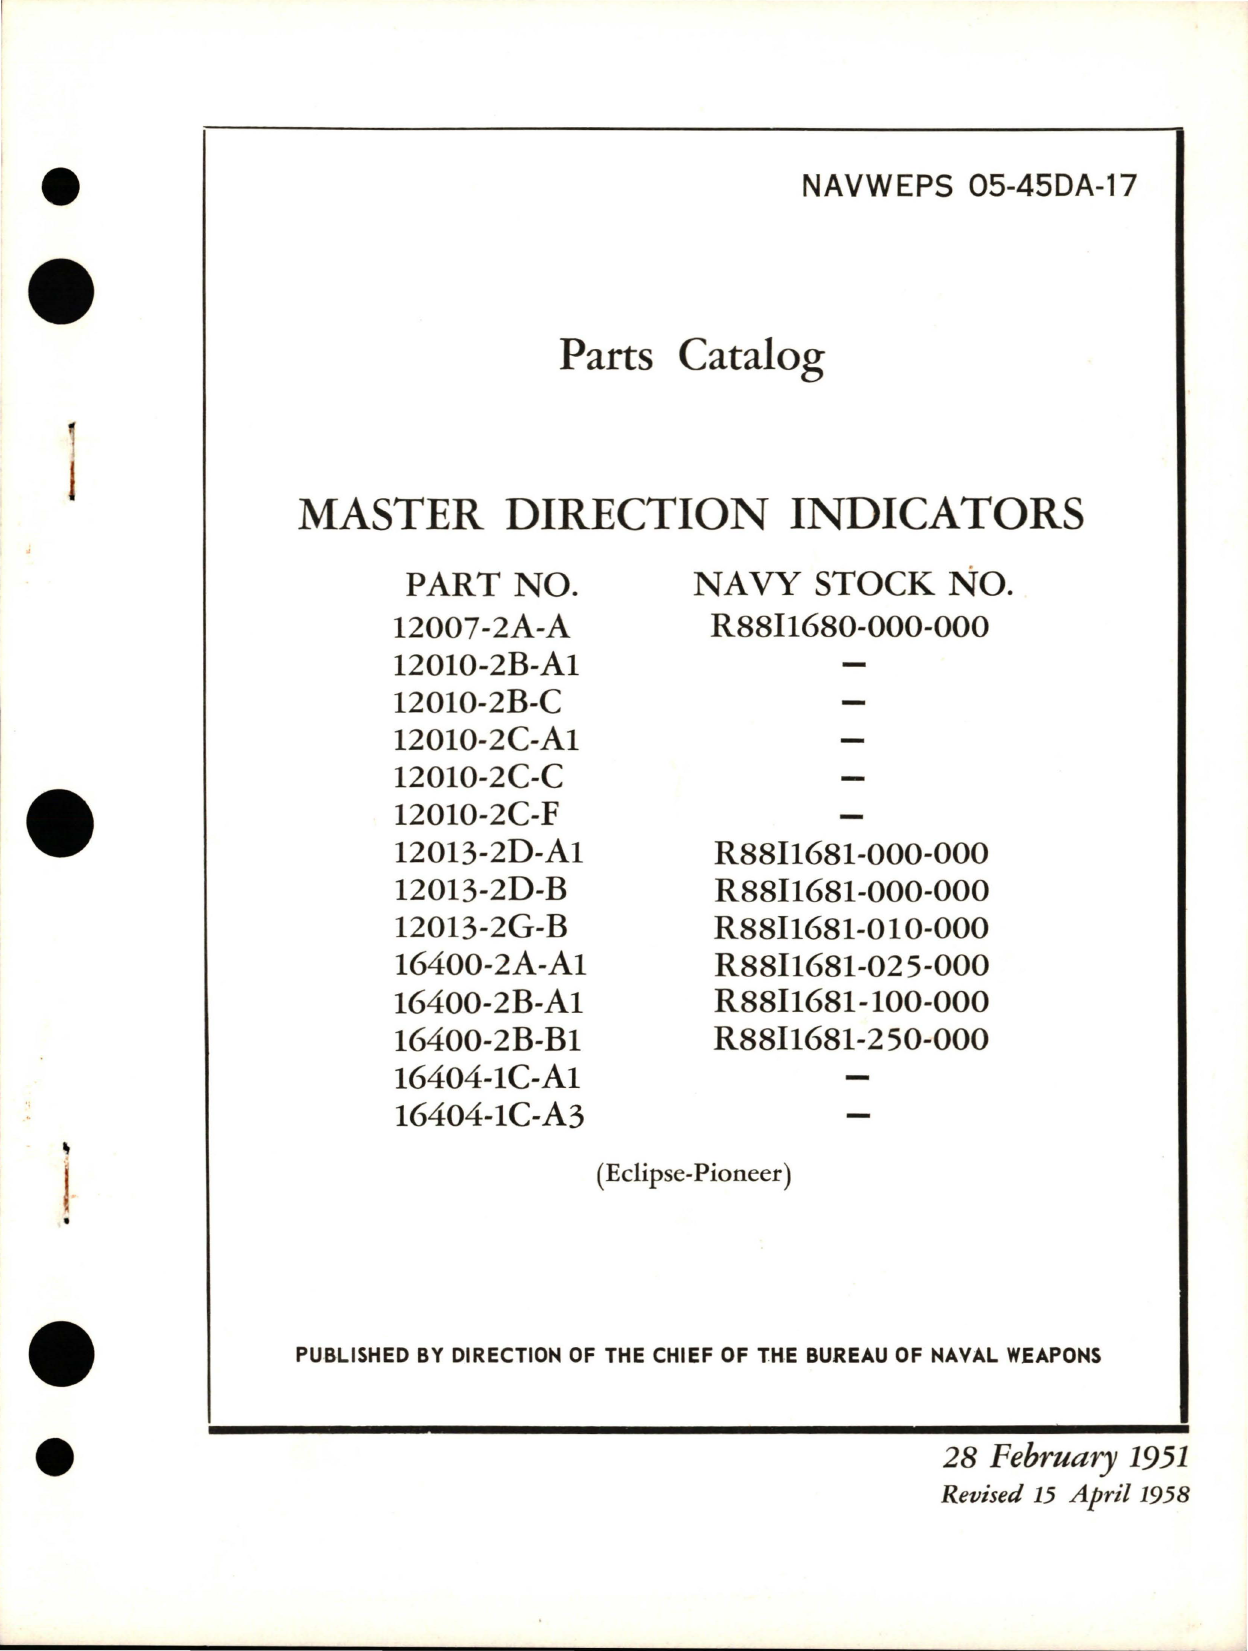 Sample page 1 from AirCorps Library document: Parts Catalog for Master Direction Indicators